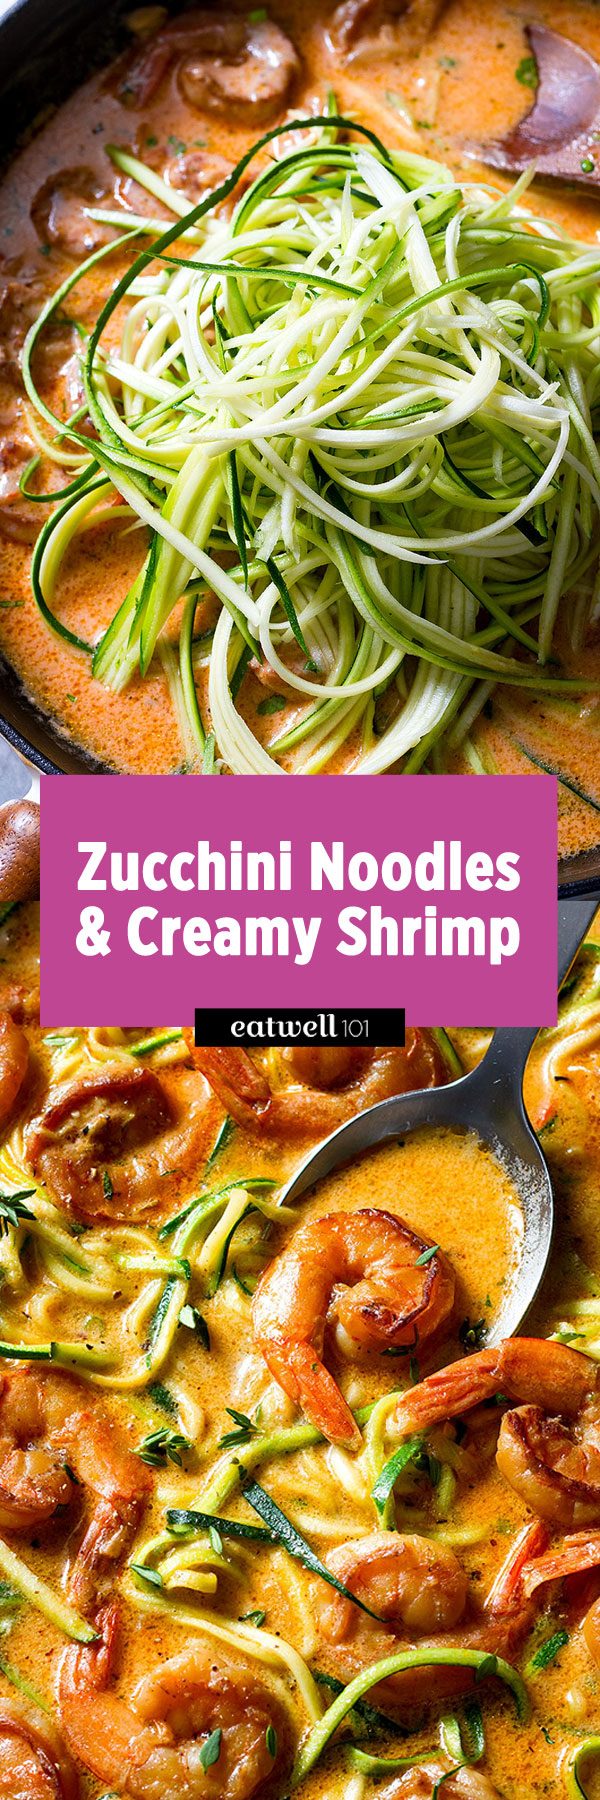 Zucchini Noodles with Shrimp Sauce - #lowcarb #recipe #eatwell101 - Perfect if you want to cut some carbs on a busy weeknight!